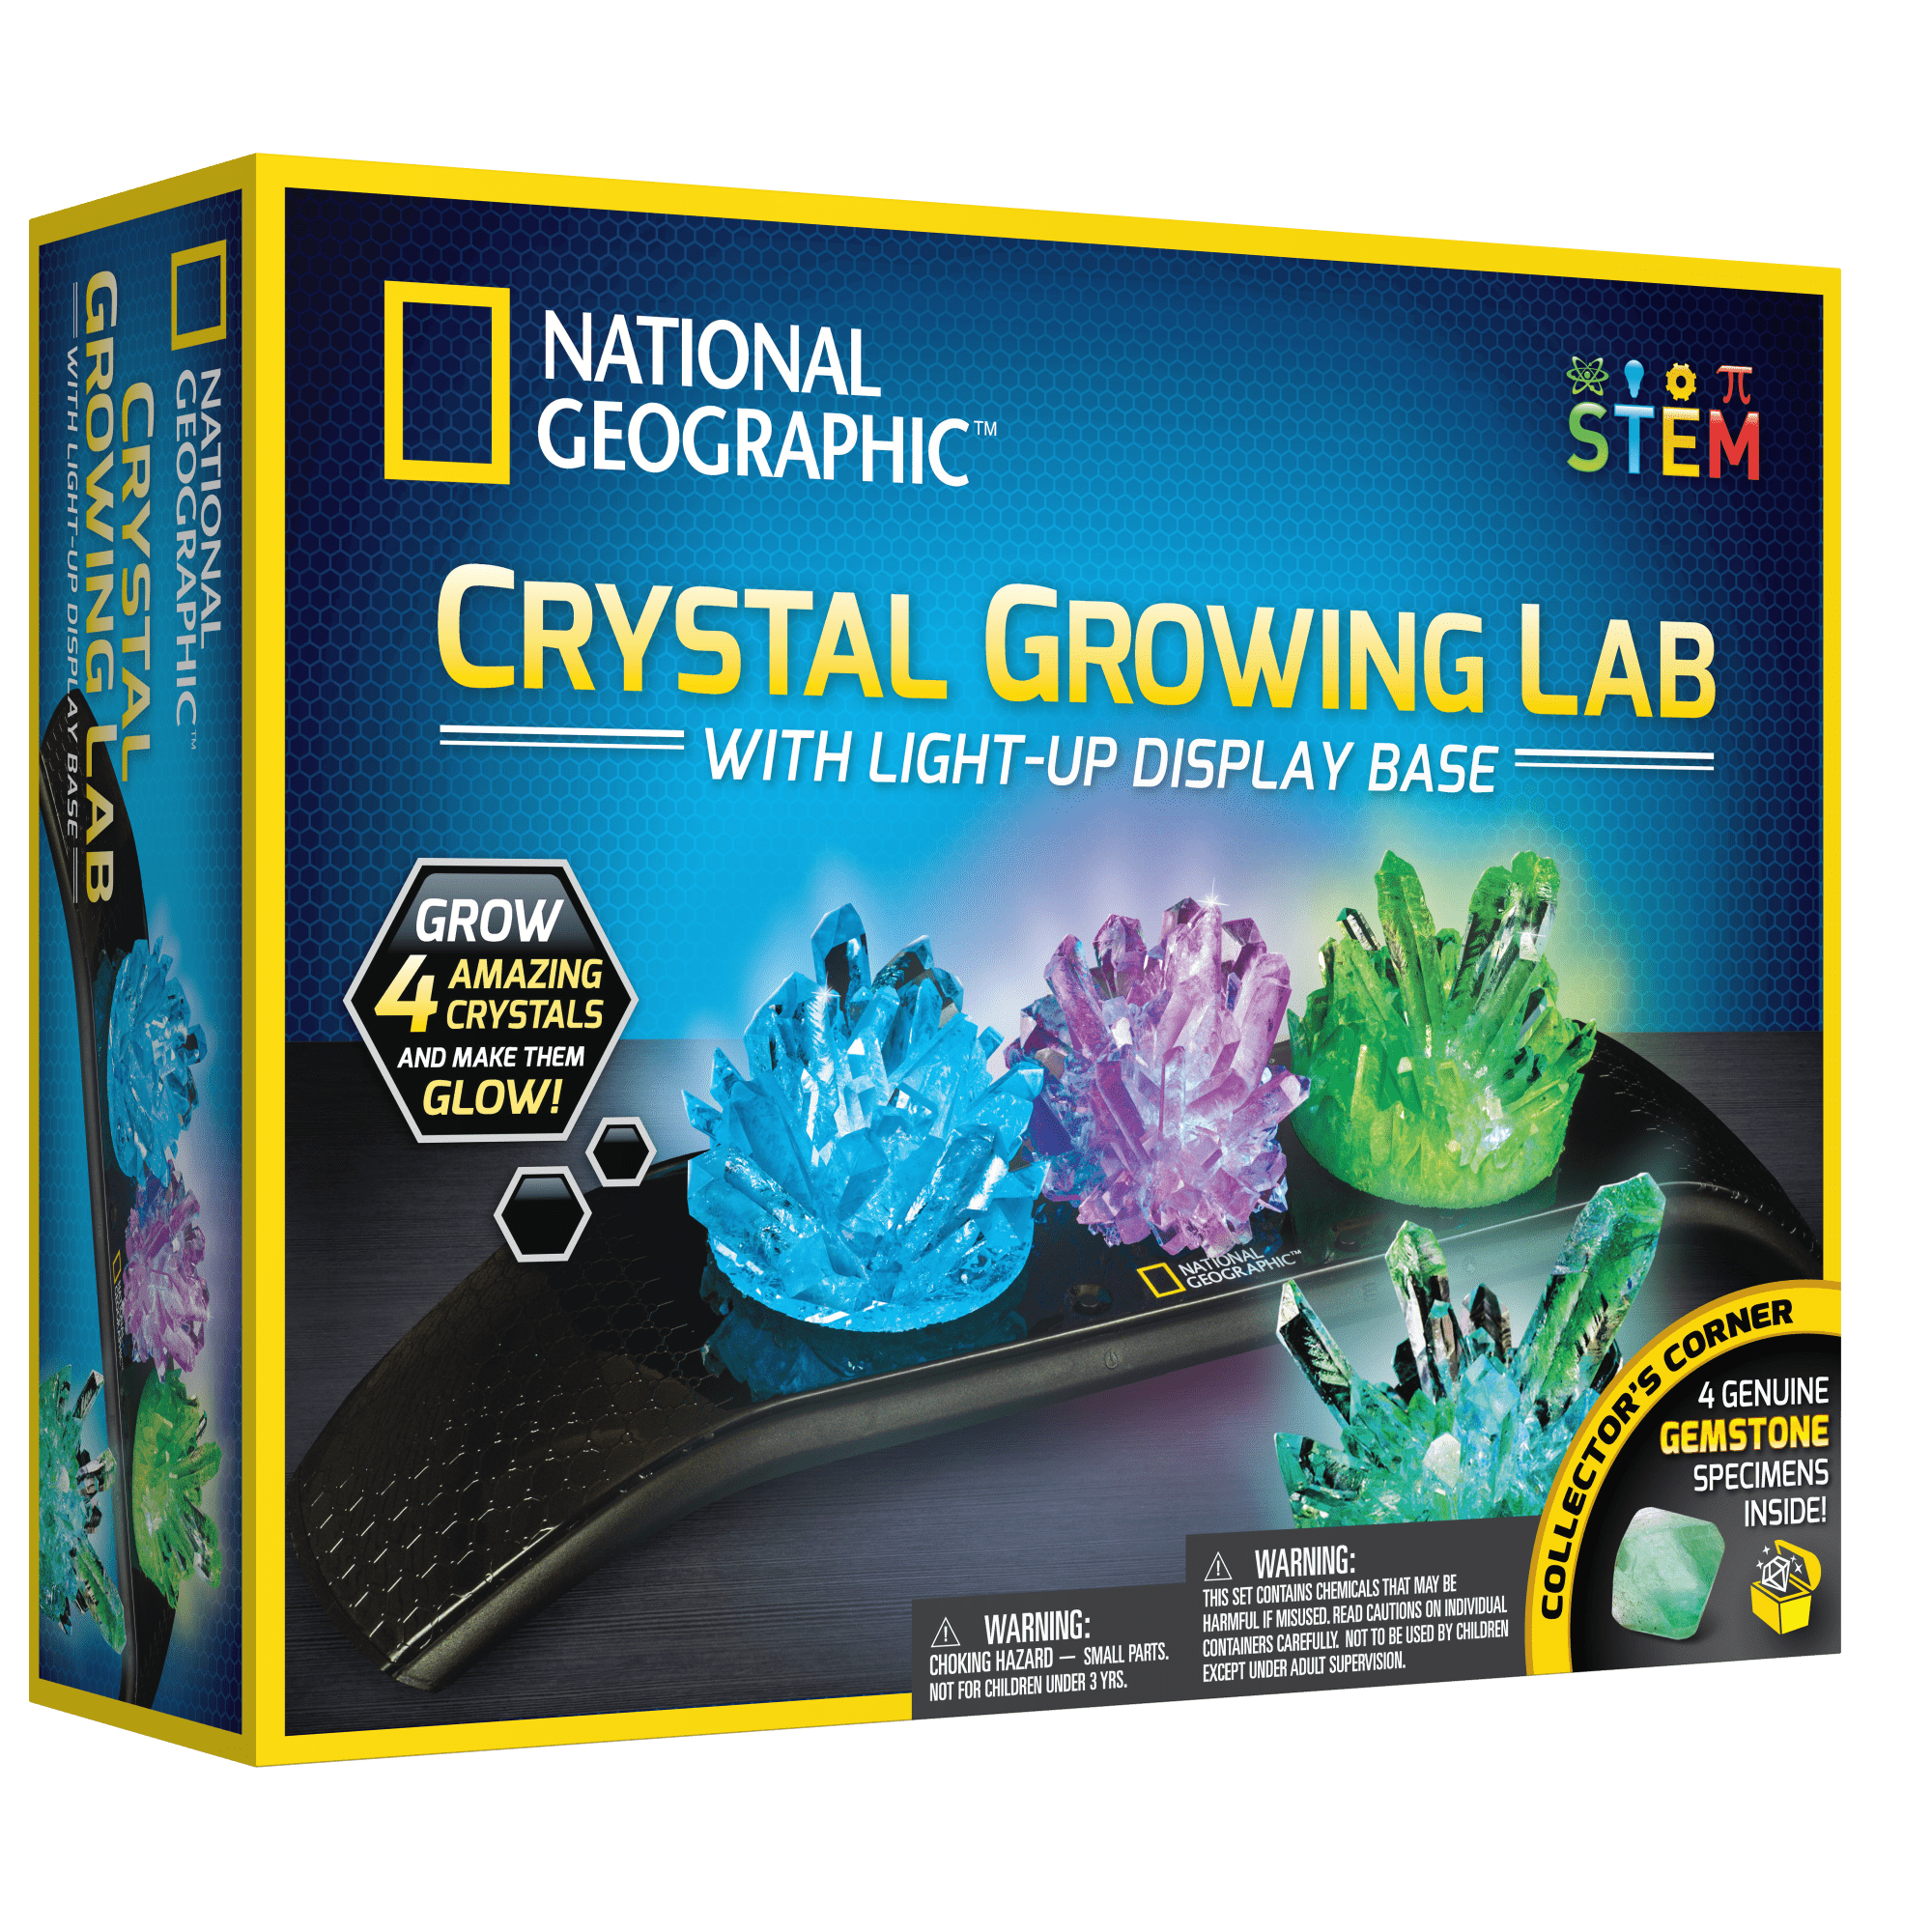 National Geographic Craft Kits for Kids - Crystal Growing Kit, Grow 6 Crystal Trees in Just 6 Hours, Educational Craft Kit with Art Supplies, Geode